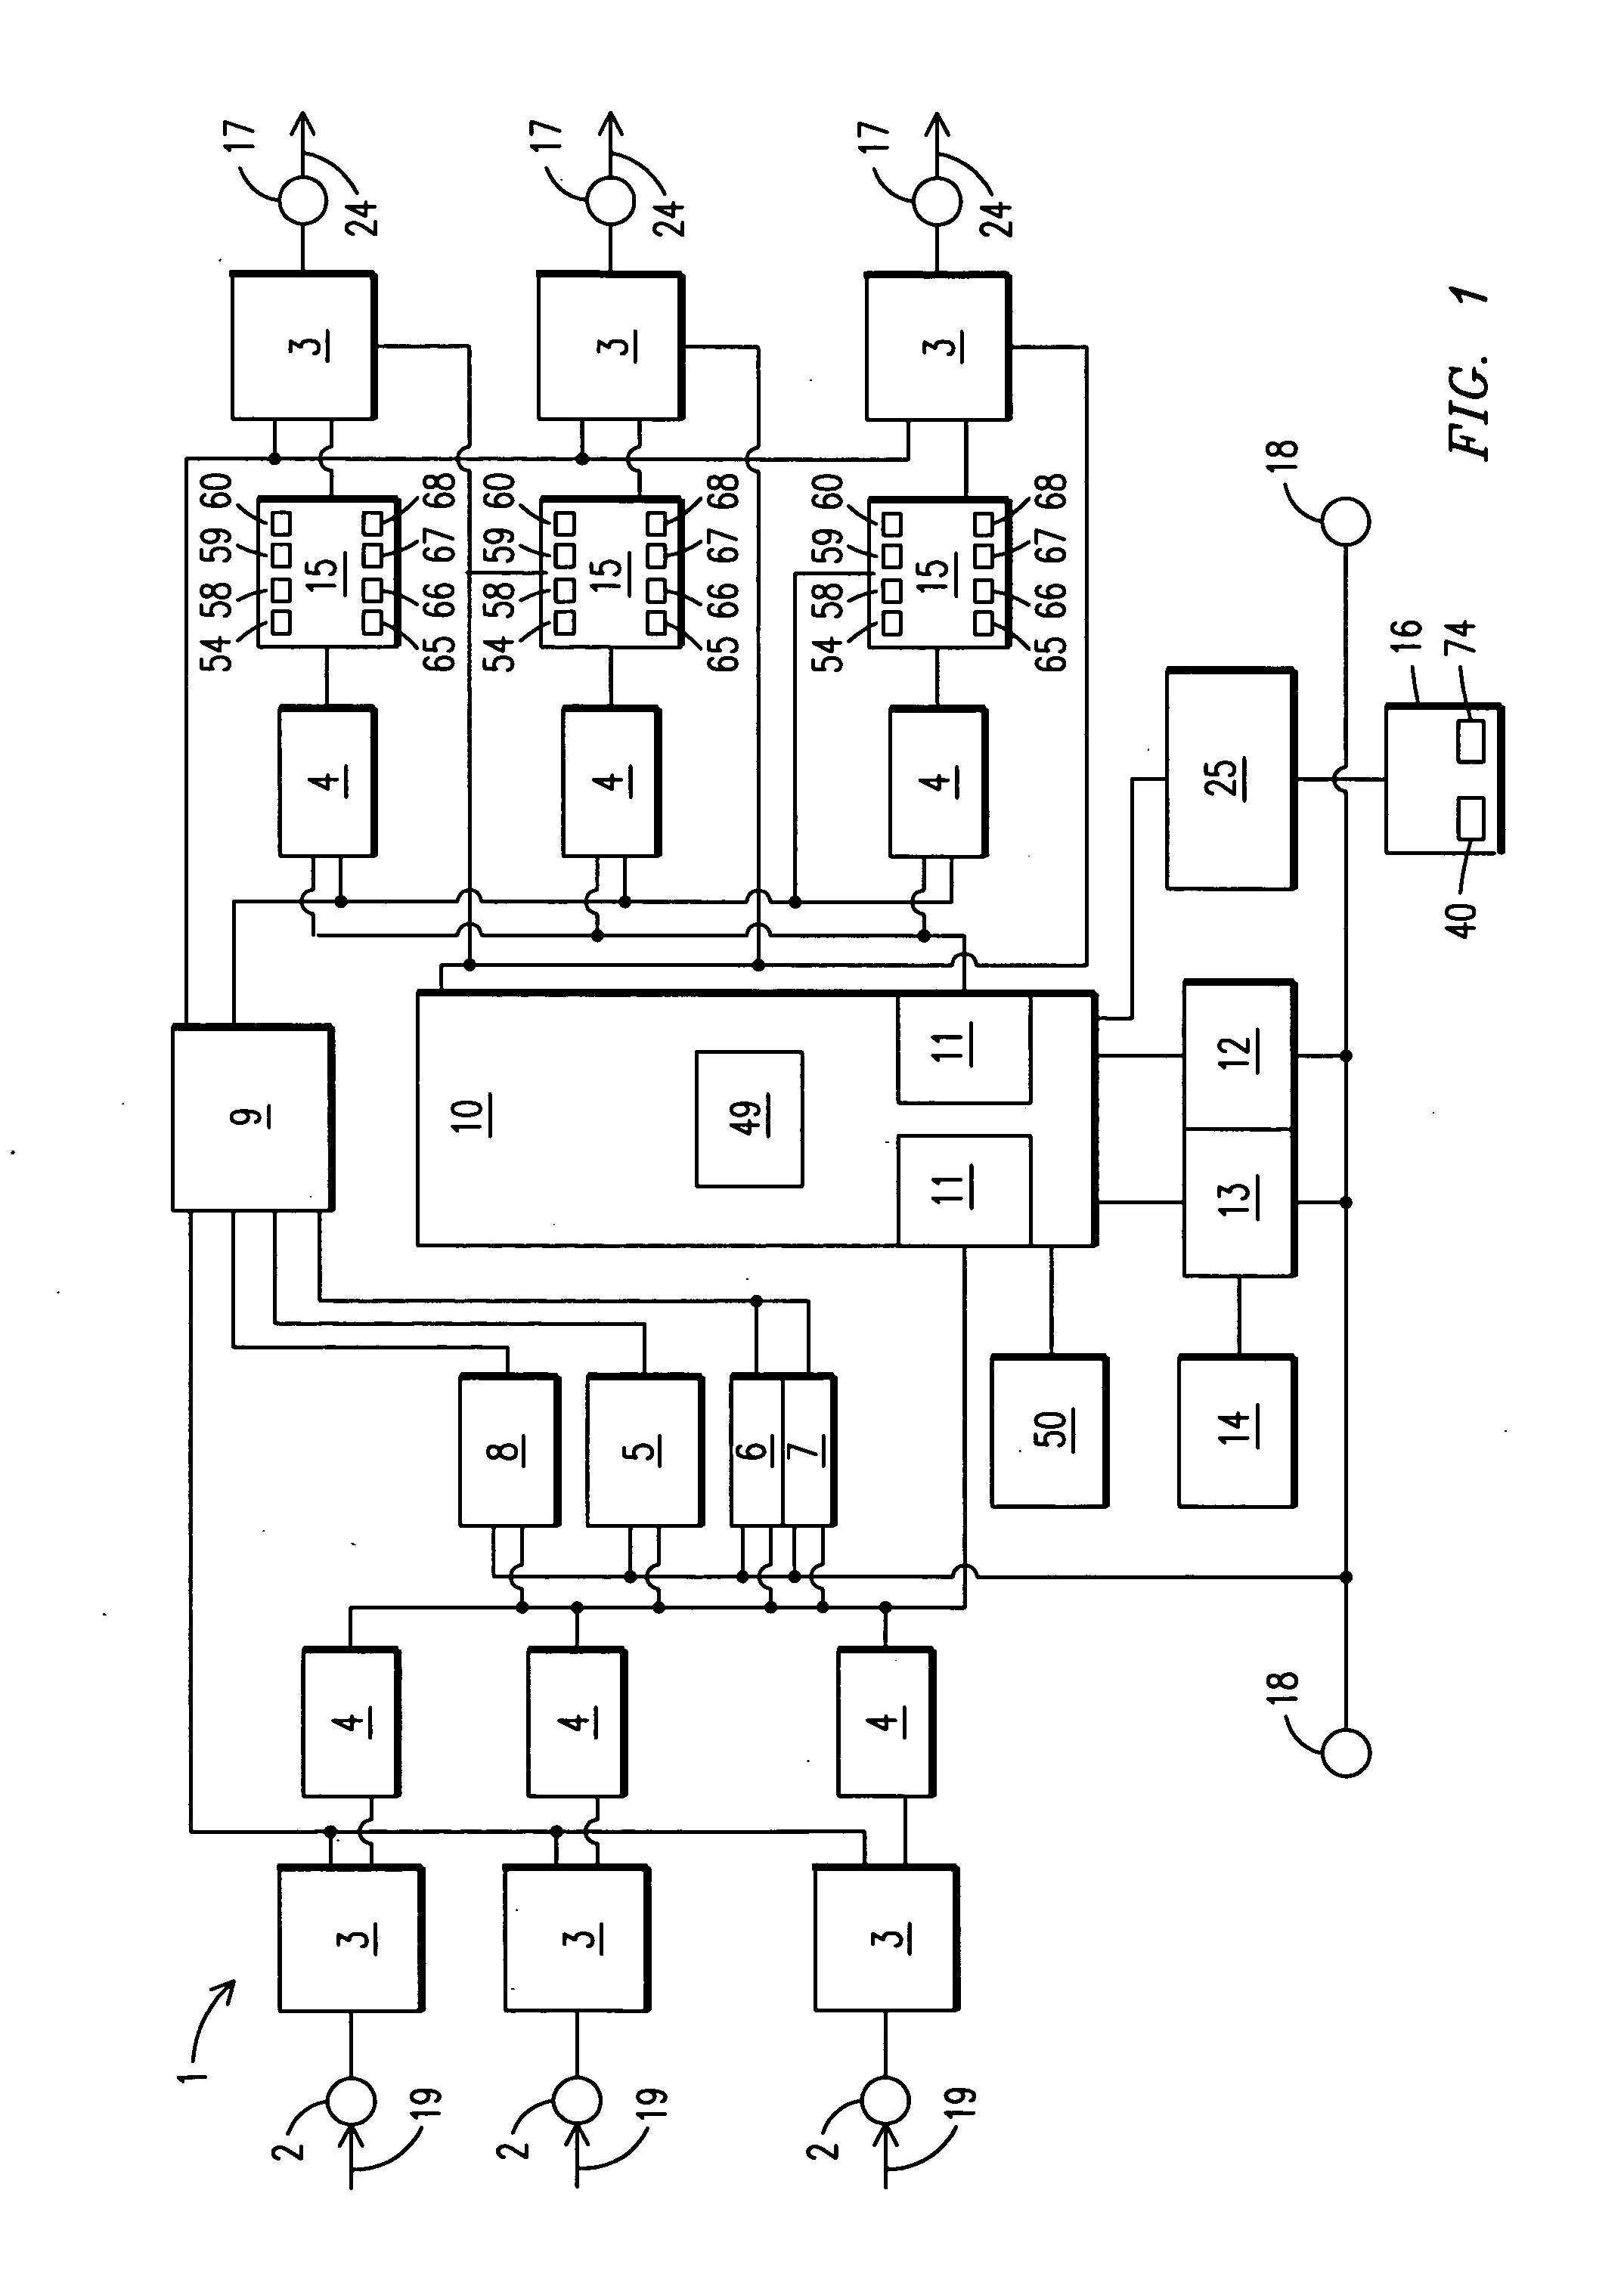 Igbt/fet-based energy savings device, system and method